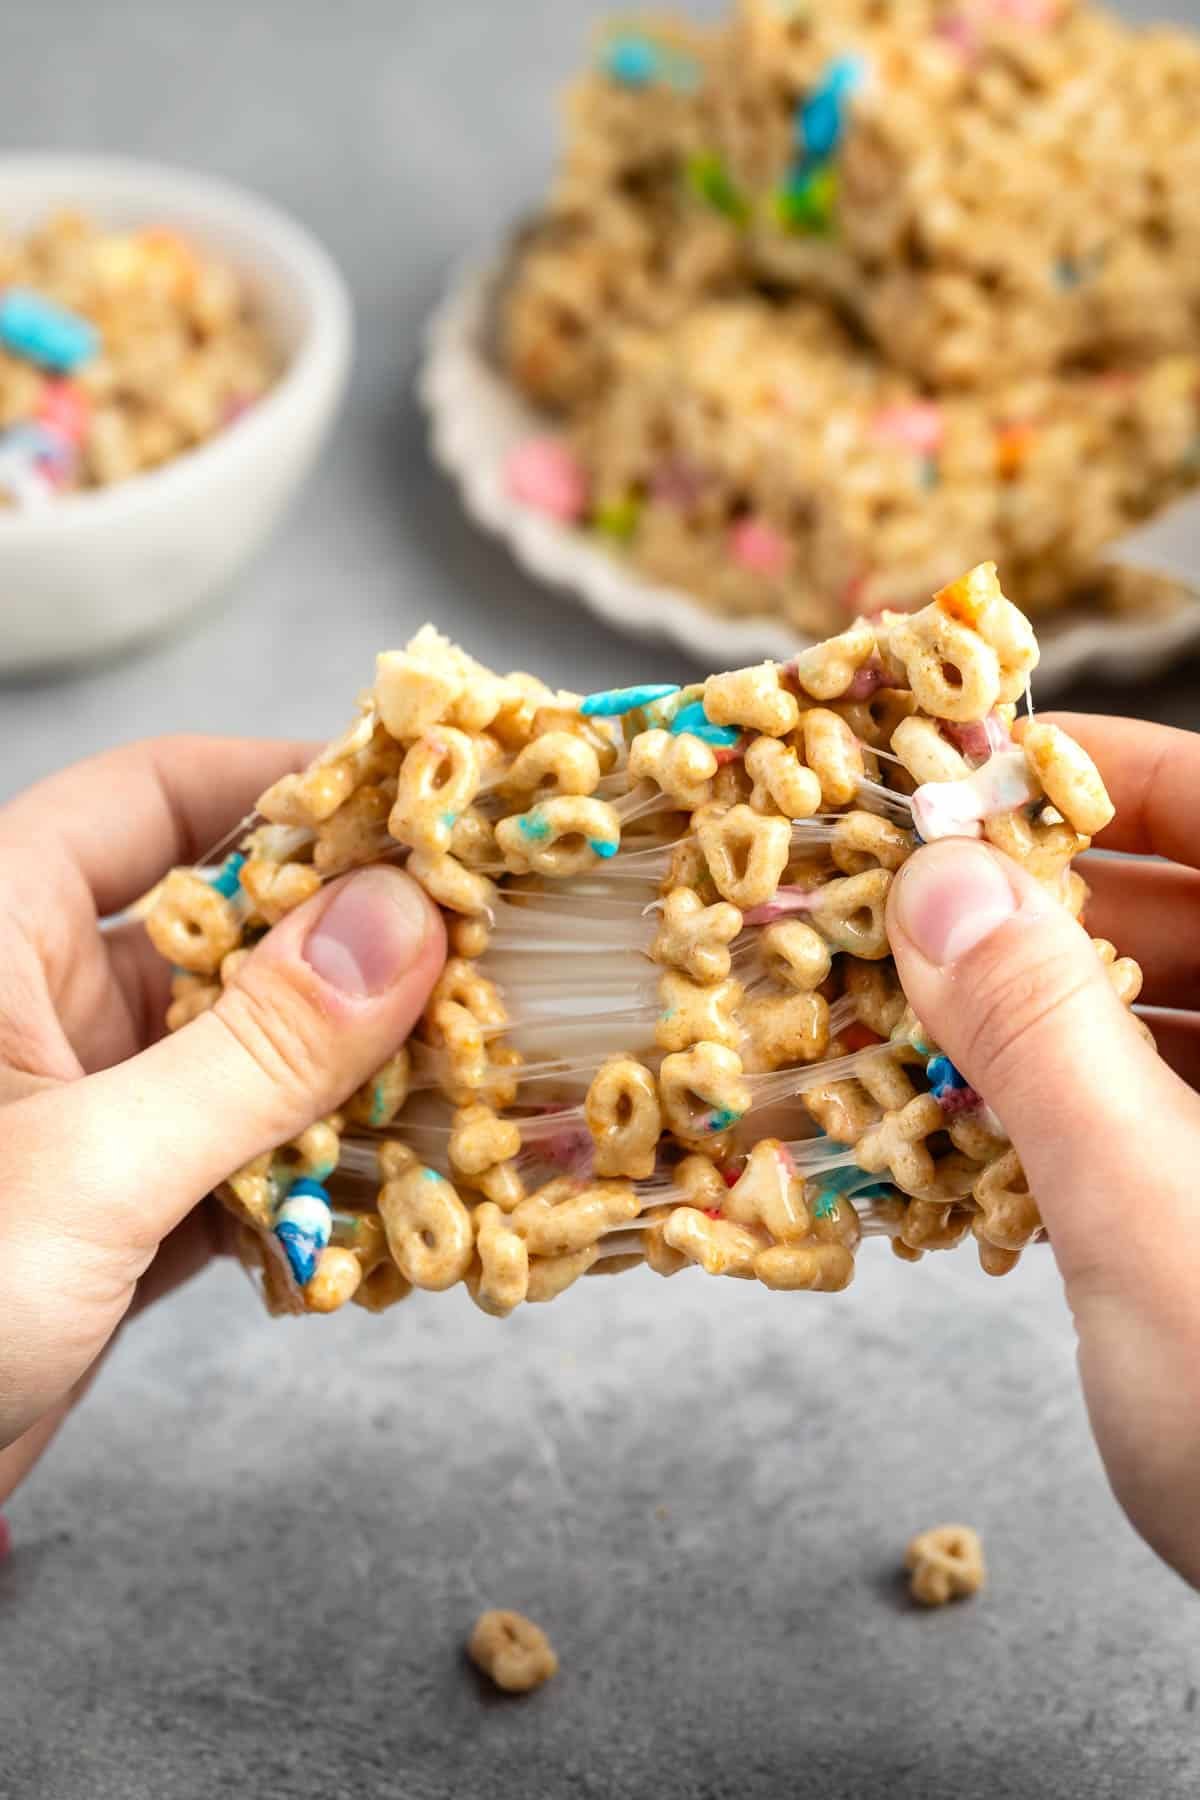 Rice Krispie treats made from lucky charms being pulled apart with hands.